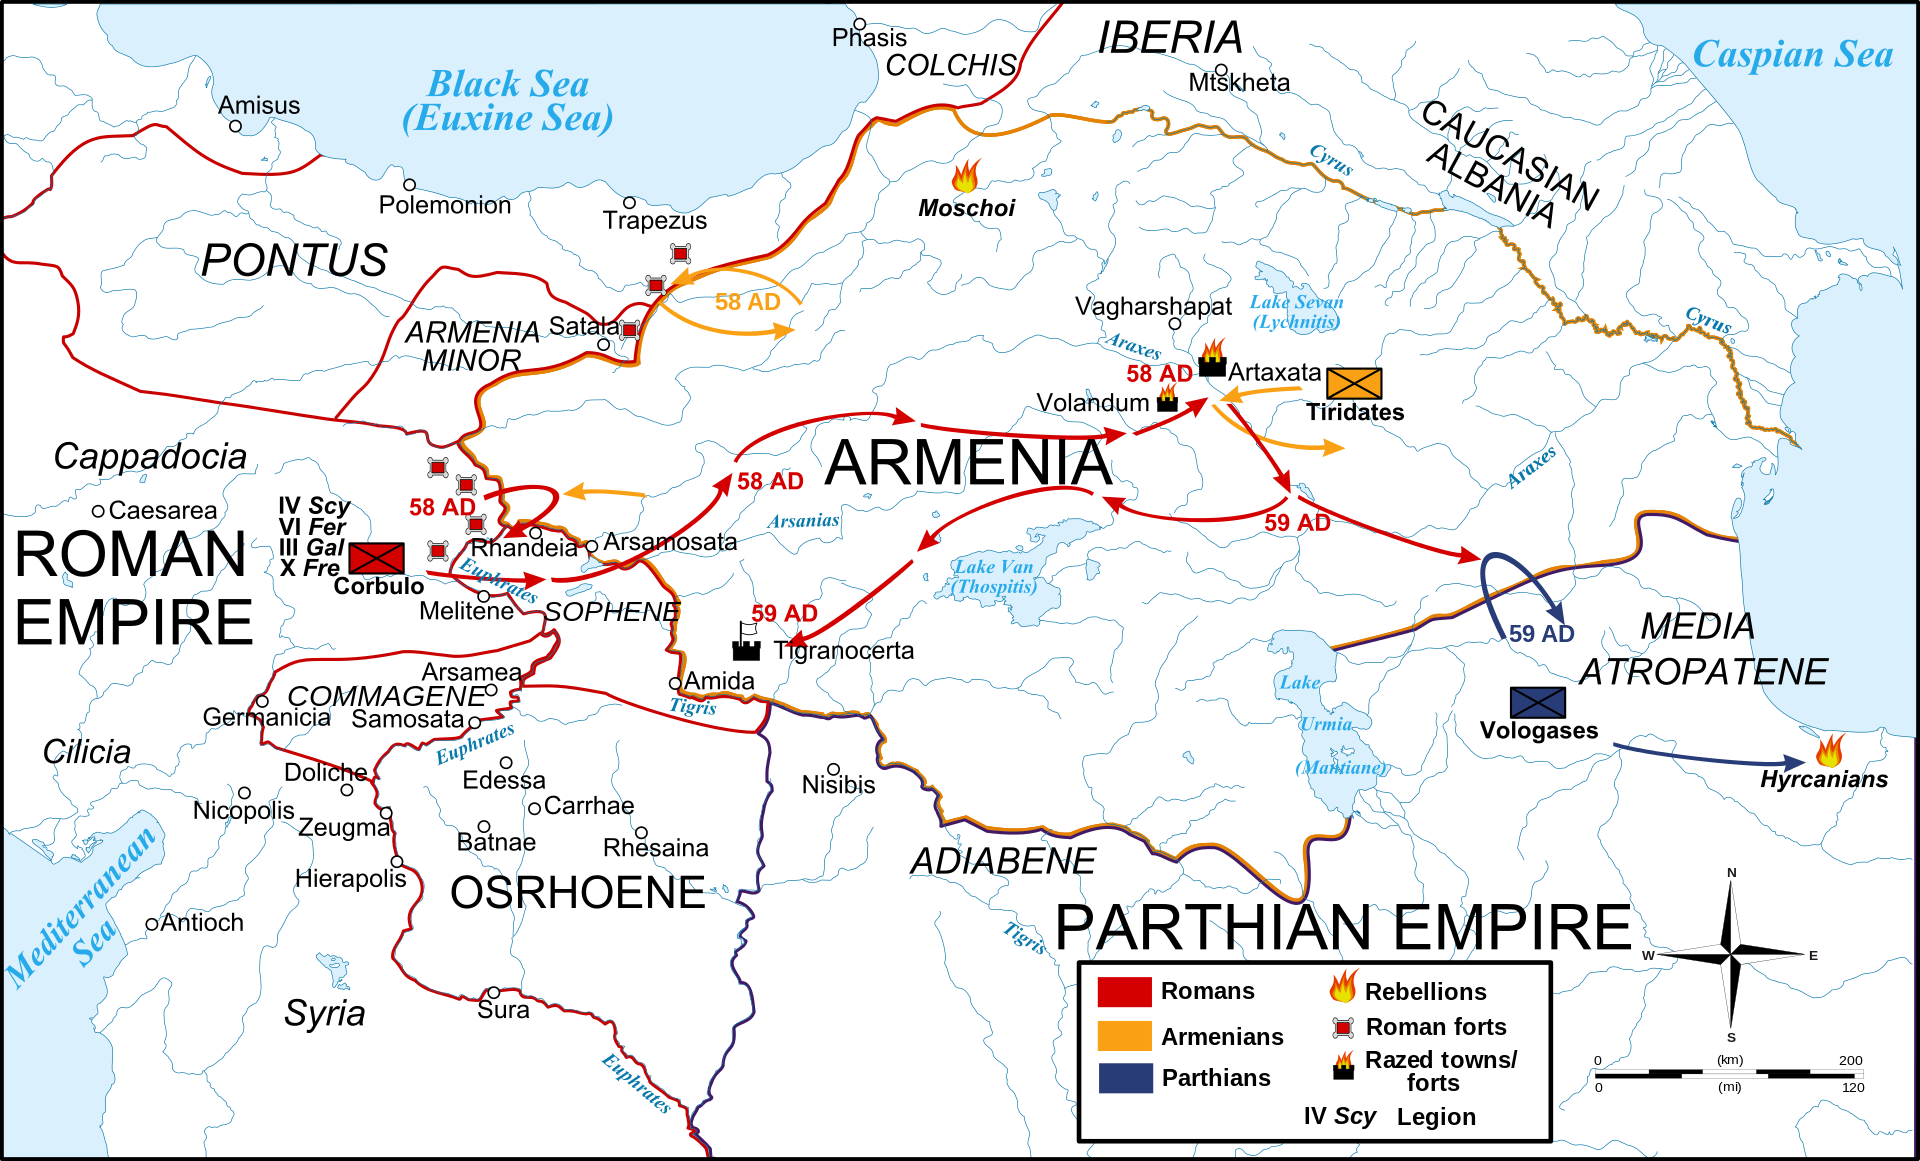 Operations during the first two years of the war: Corbulo's invasion and conquest of Armenia